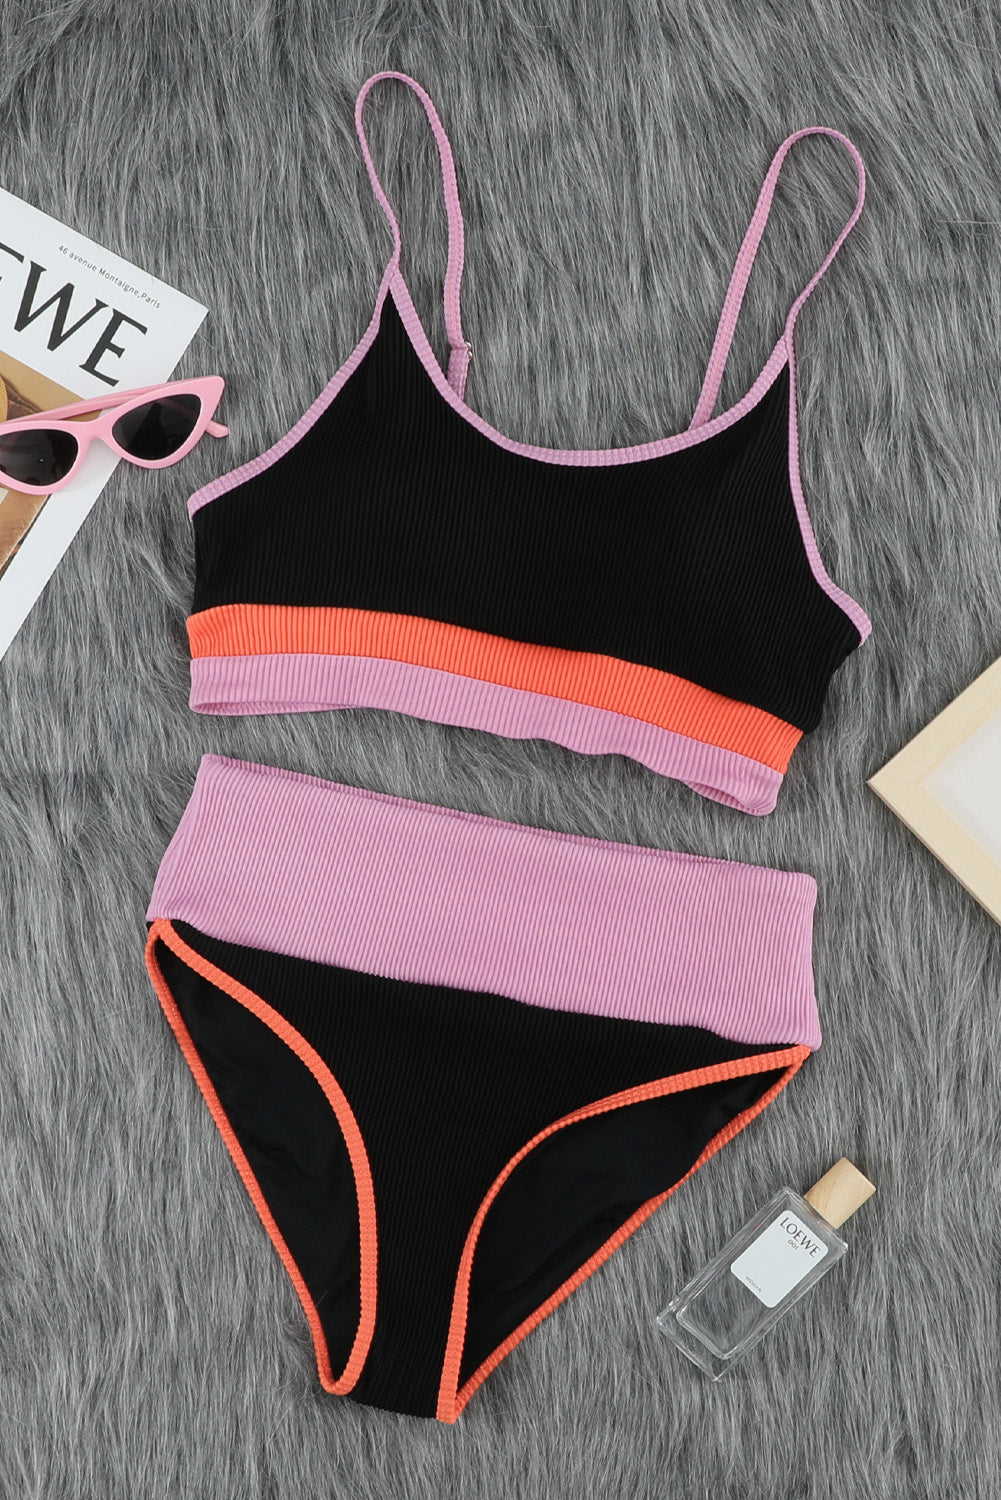 Spaghetti Straps Colorblock Ribbed High Waisted Swimsuit